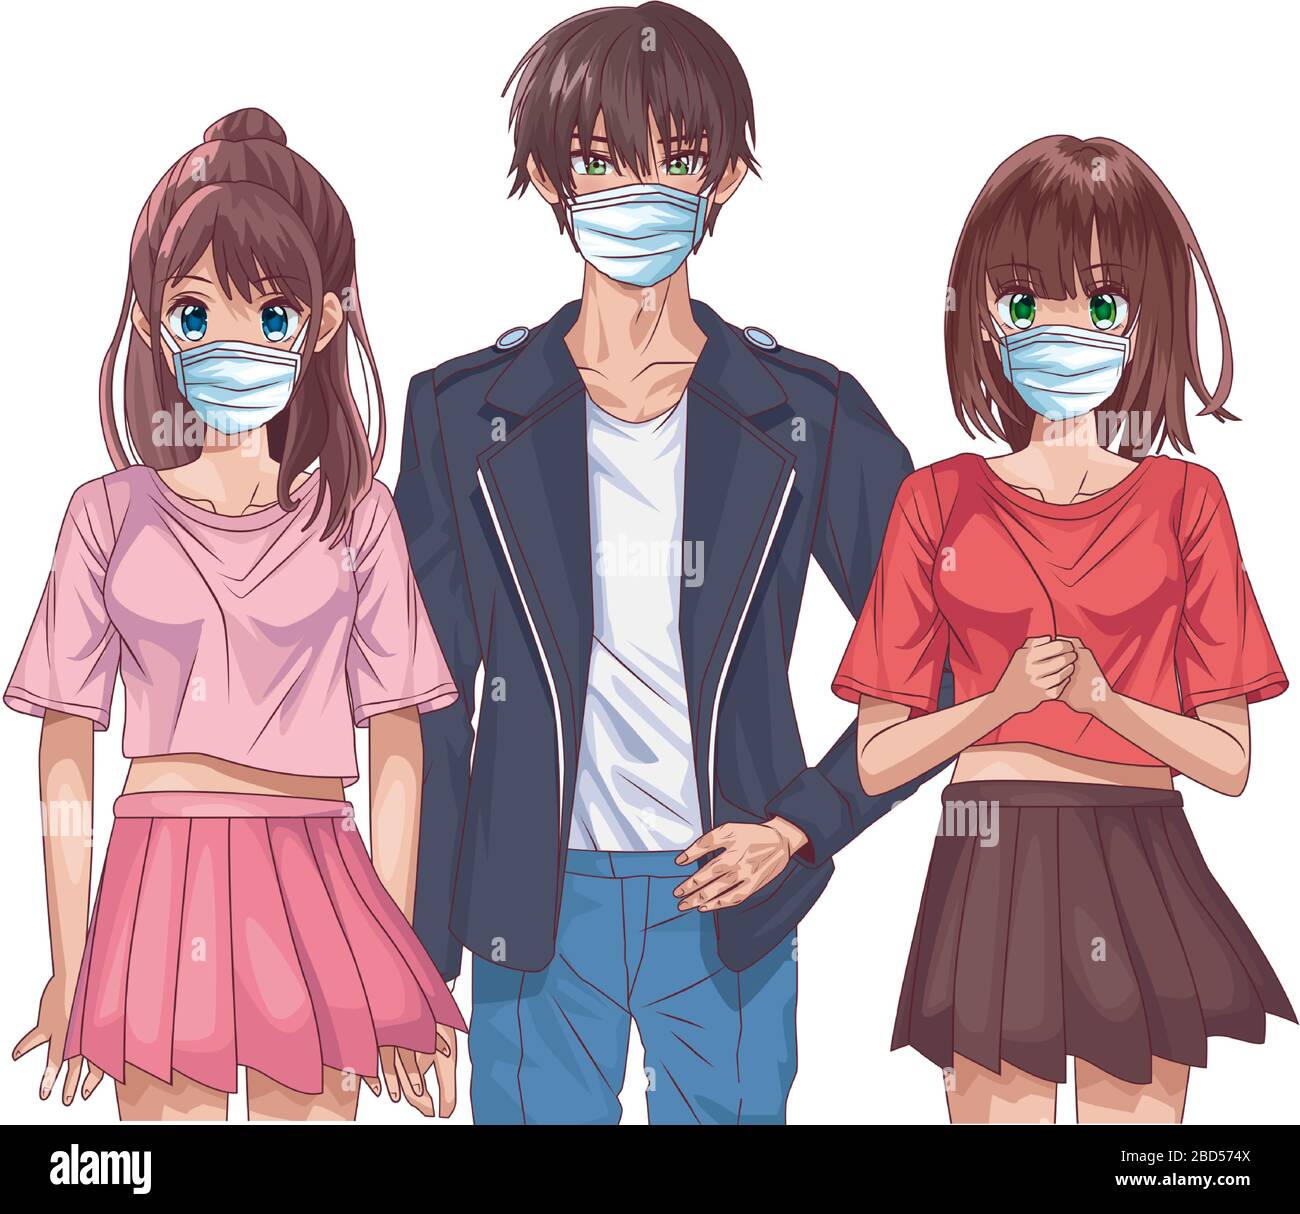 Young couple using face masks anime characters Vector Image